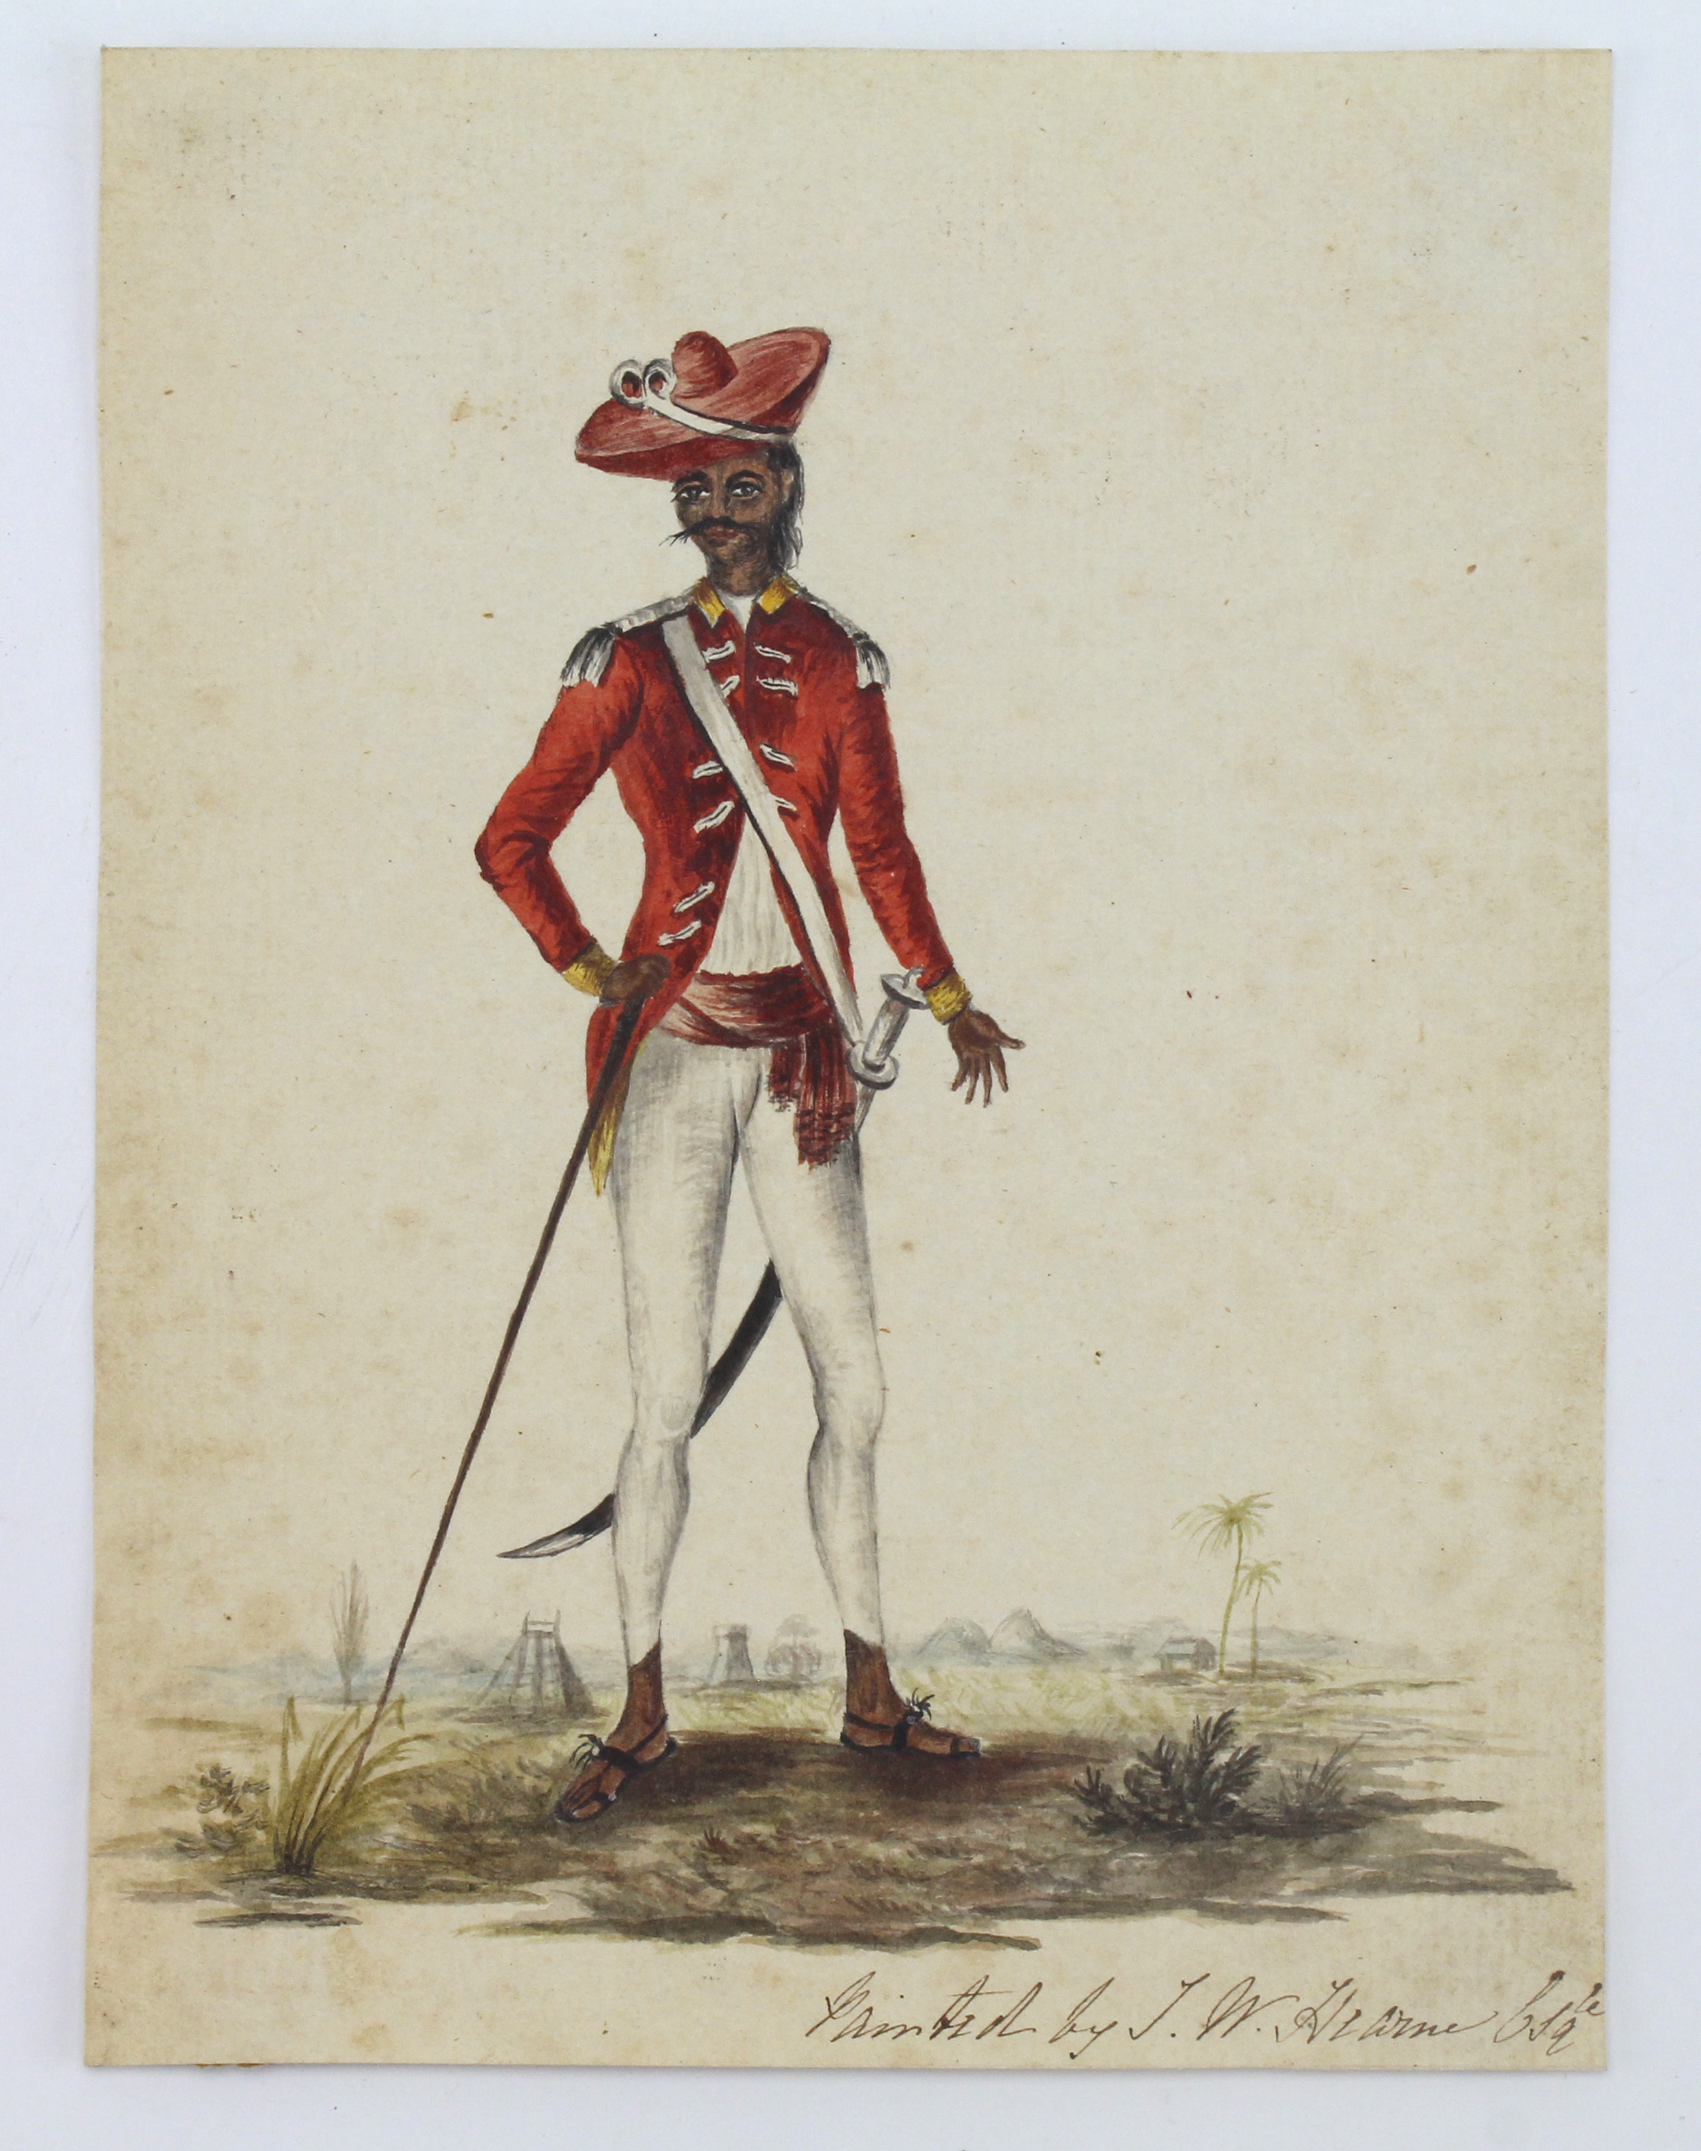 Military interest. Exquisite hand drawn pencil & watercolour illustration, circa 1785, depicting a